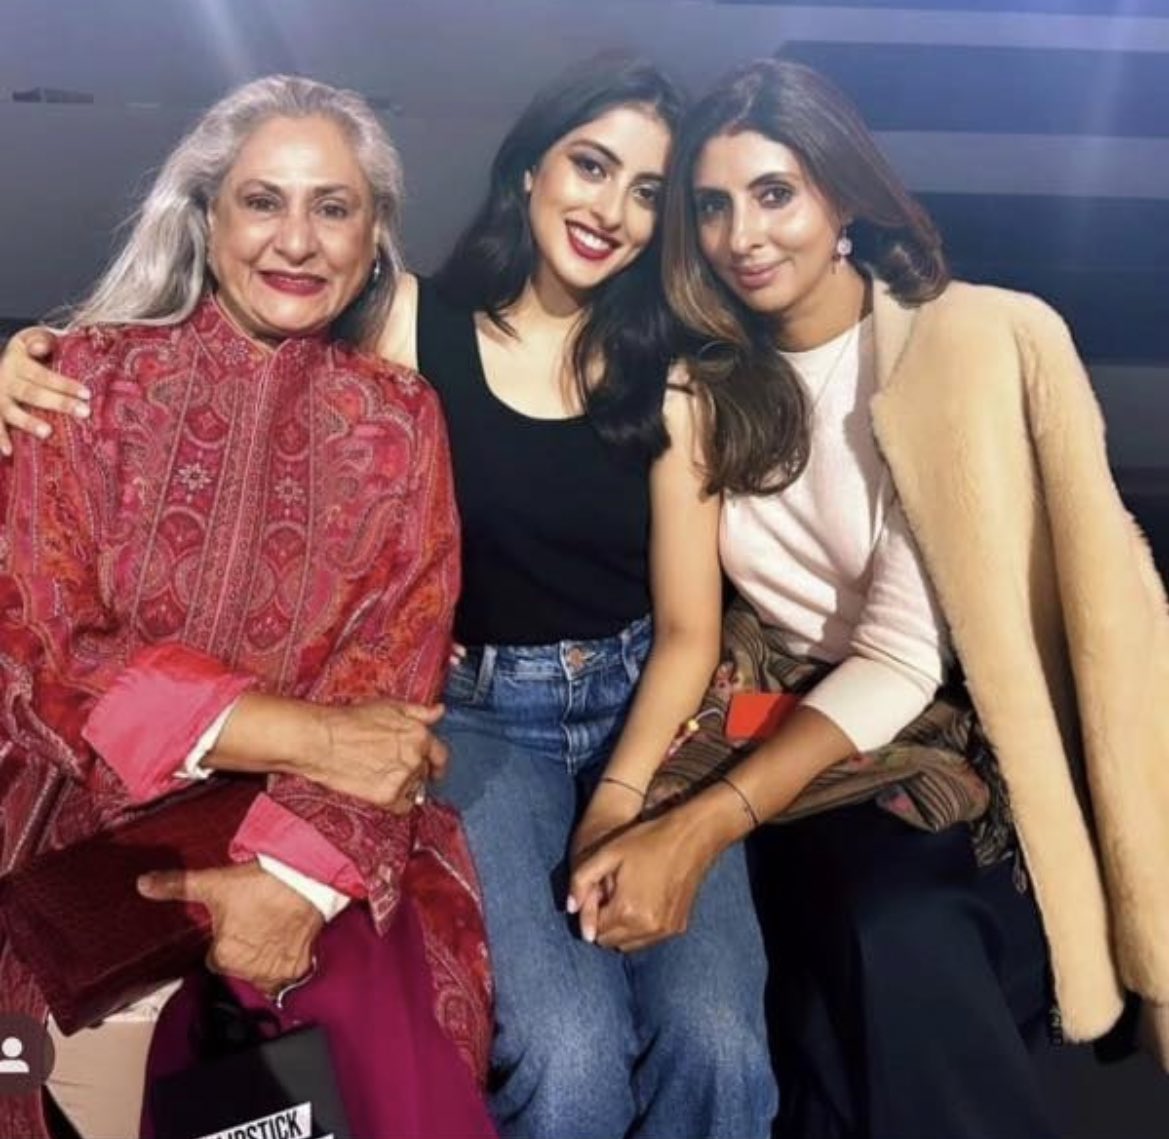 #JayaBachchan, #NavyaNanda and #ShwetaBachchan are all smiles in new pic. 💗